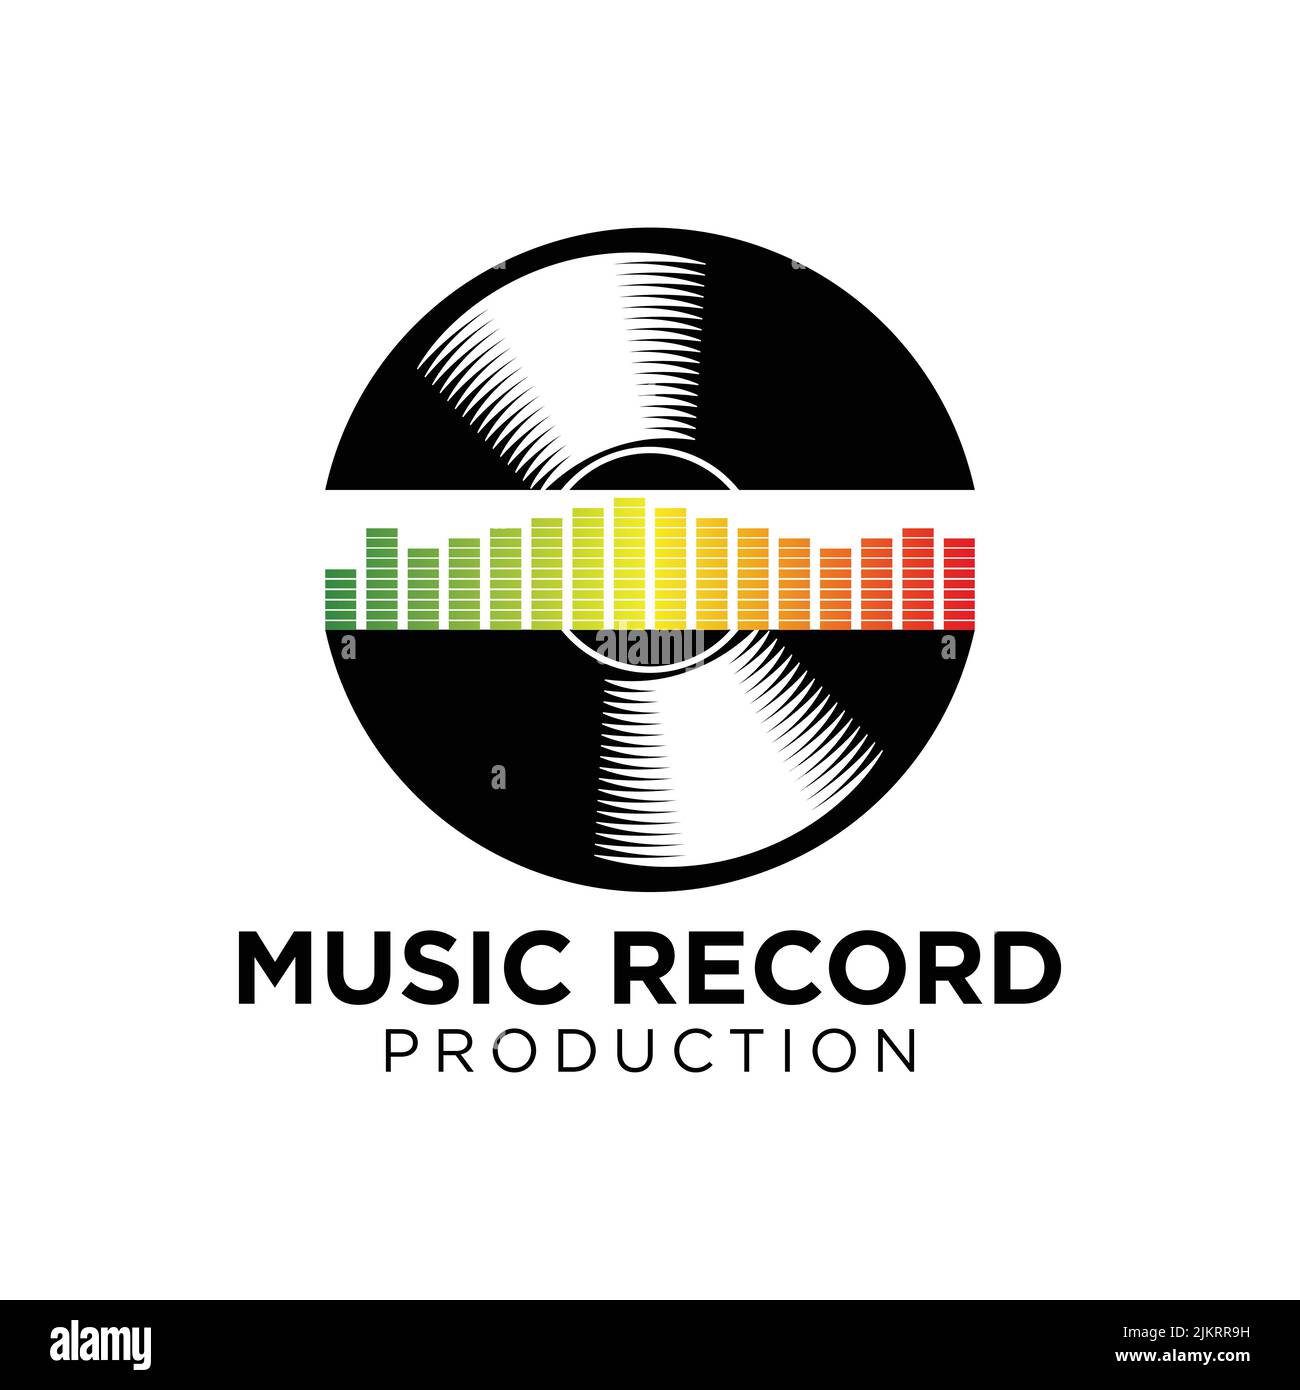 A Music Record Production text and logo on a white background Stock Vector